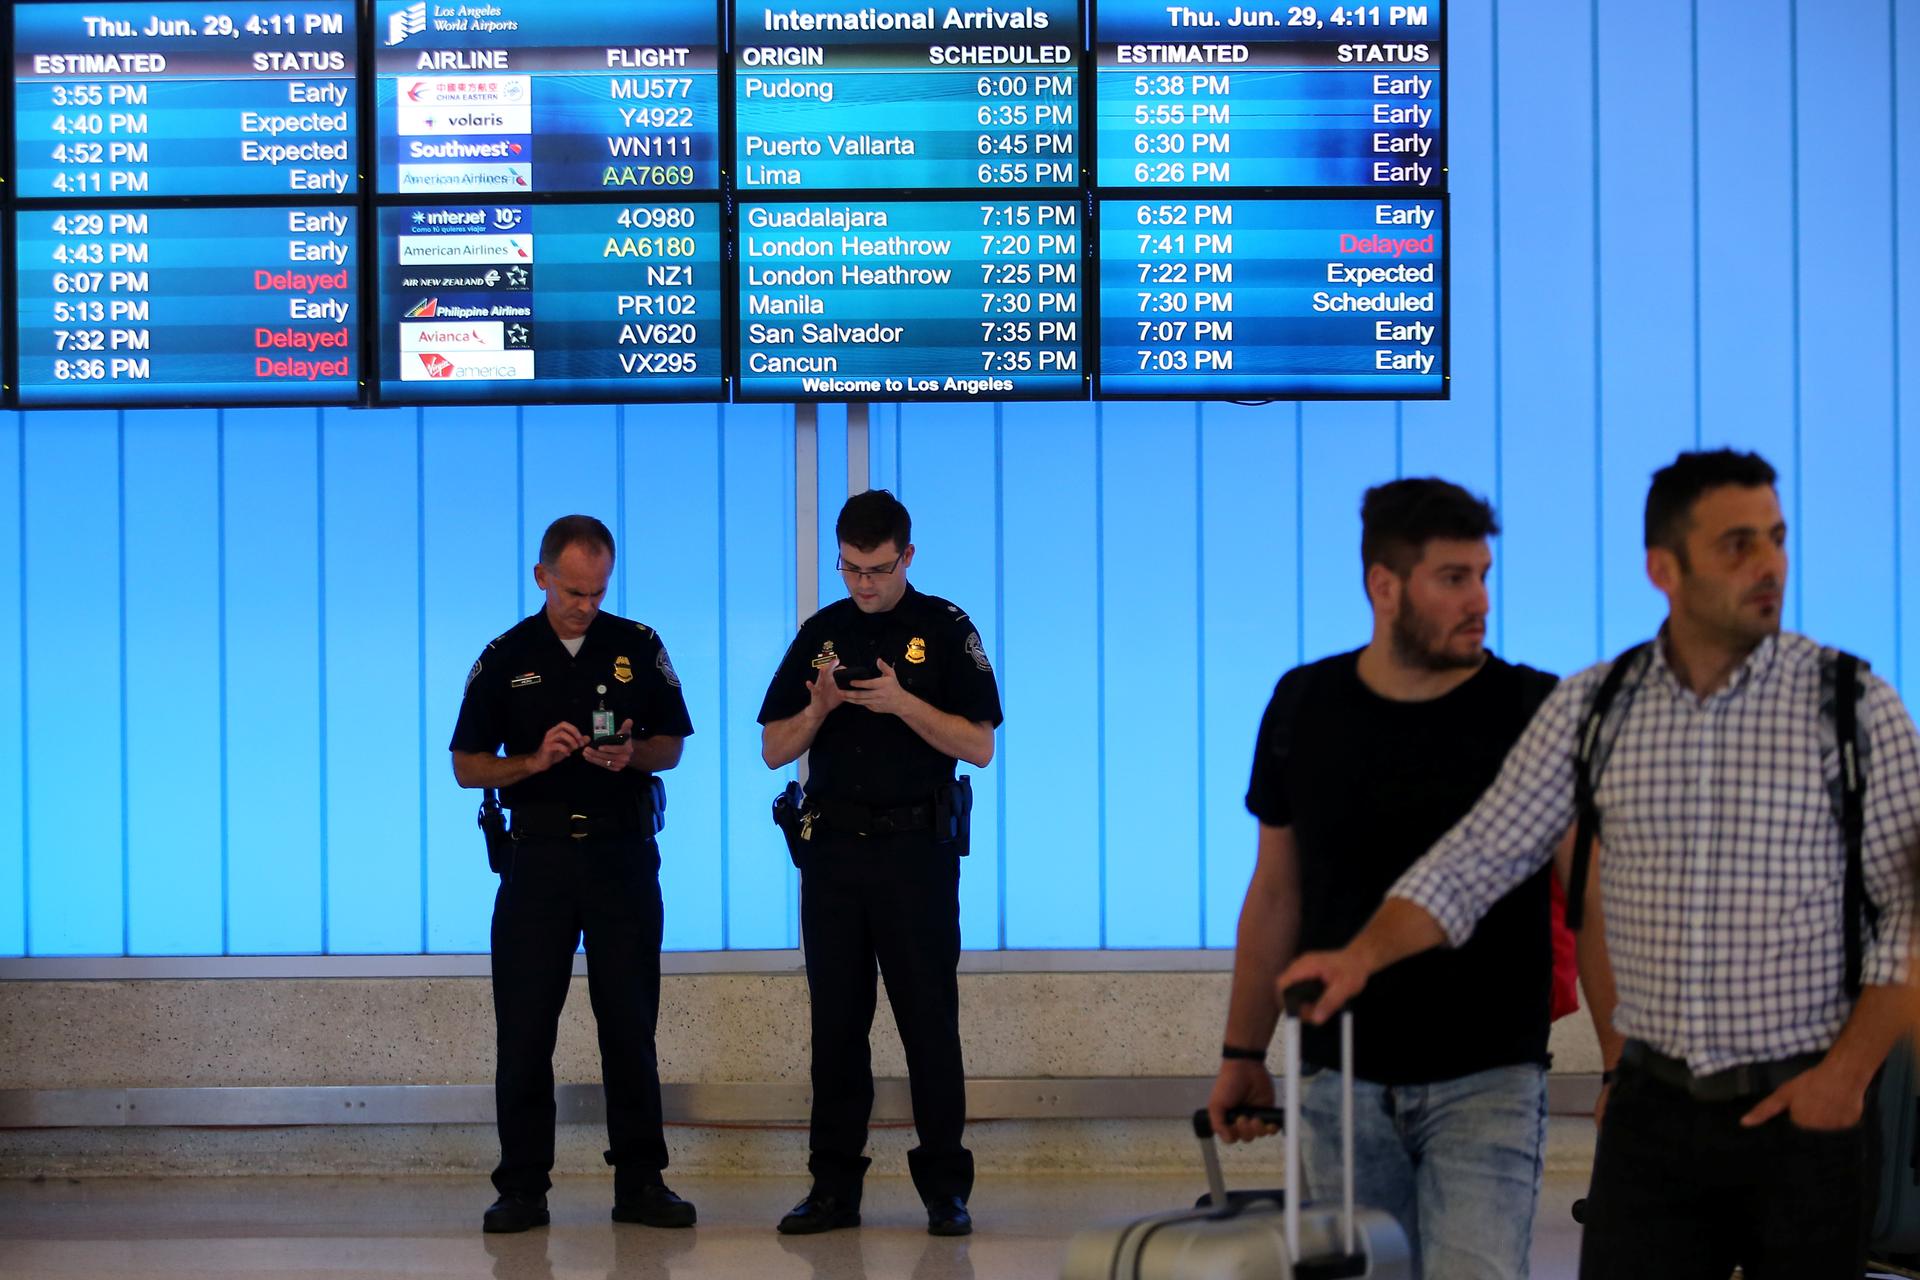 US Customs and Immigration officers keep watch at the arrivals level at Los Angeles International Airport, June 29, 2017